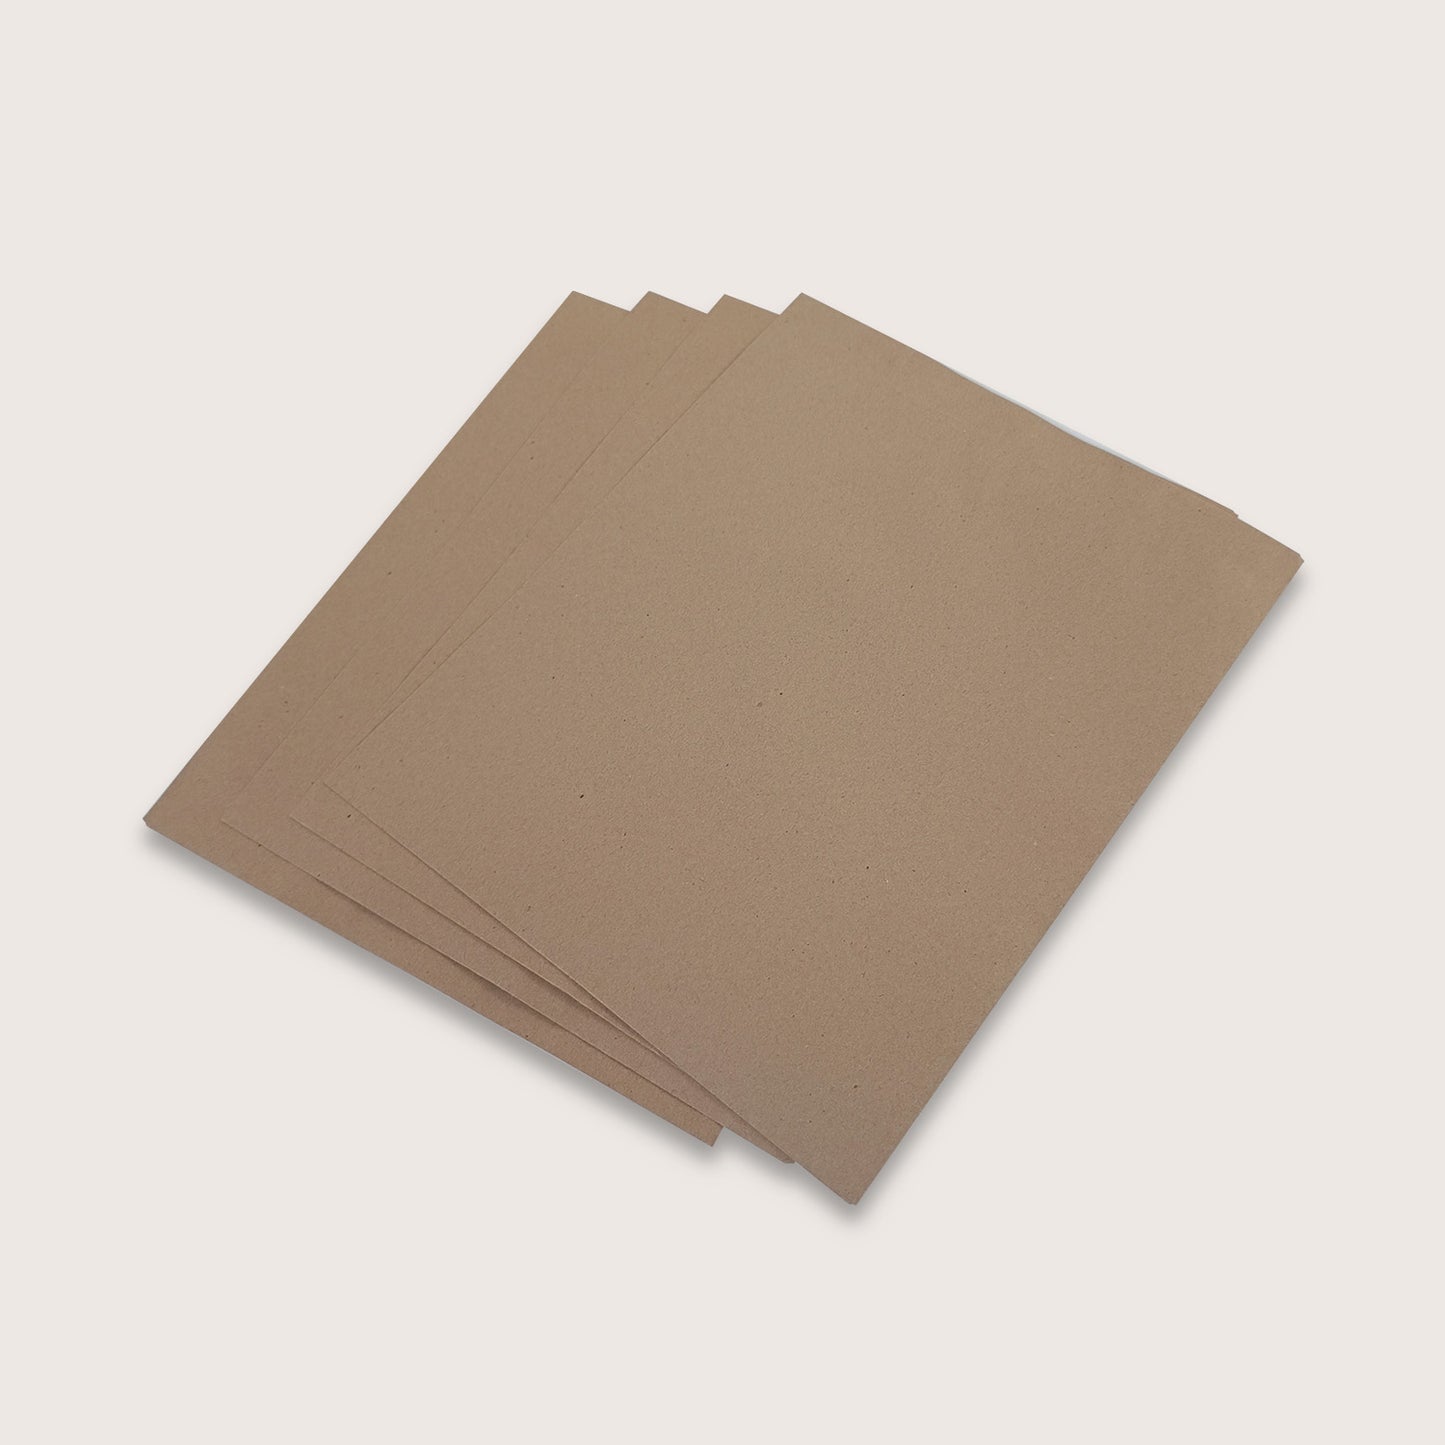 Packmate A4 Envelope (Pack of 50)  Made From 100% Recycled Paper